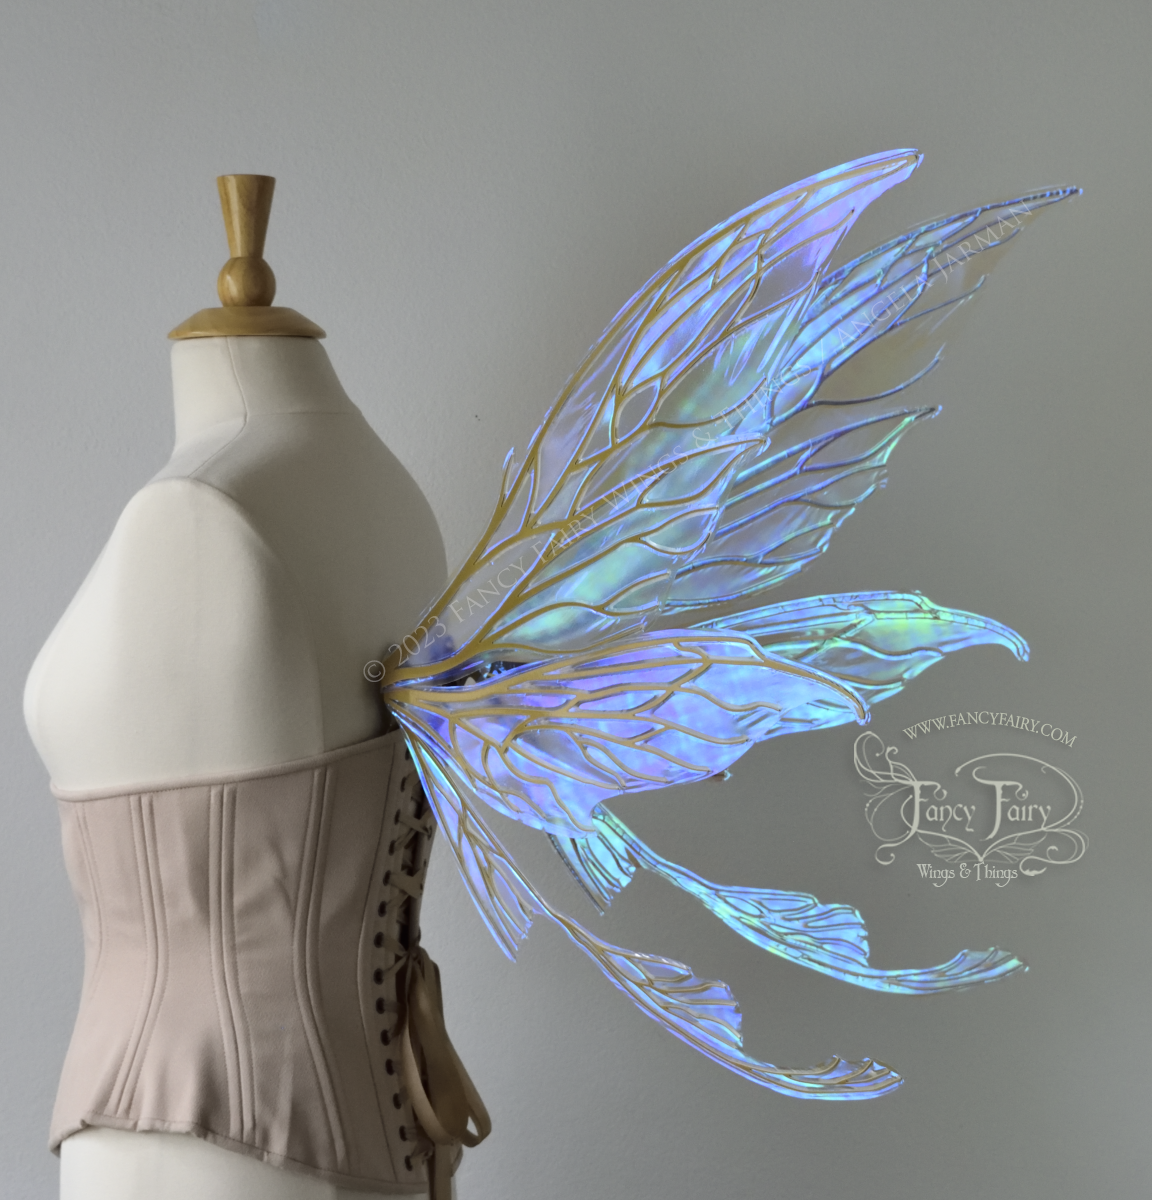 Back 3/4 view of a dress form wearing an underbust corset & large blue iridescent fairy wings with gold veins. Upper panels are elongated with pointed tips, curved ‘tail’ 